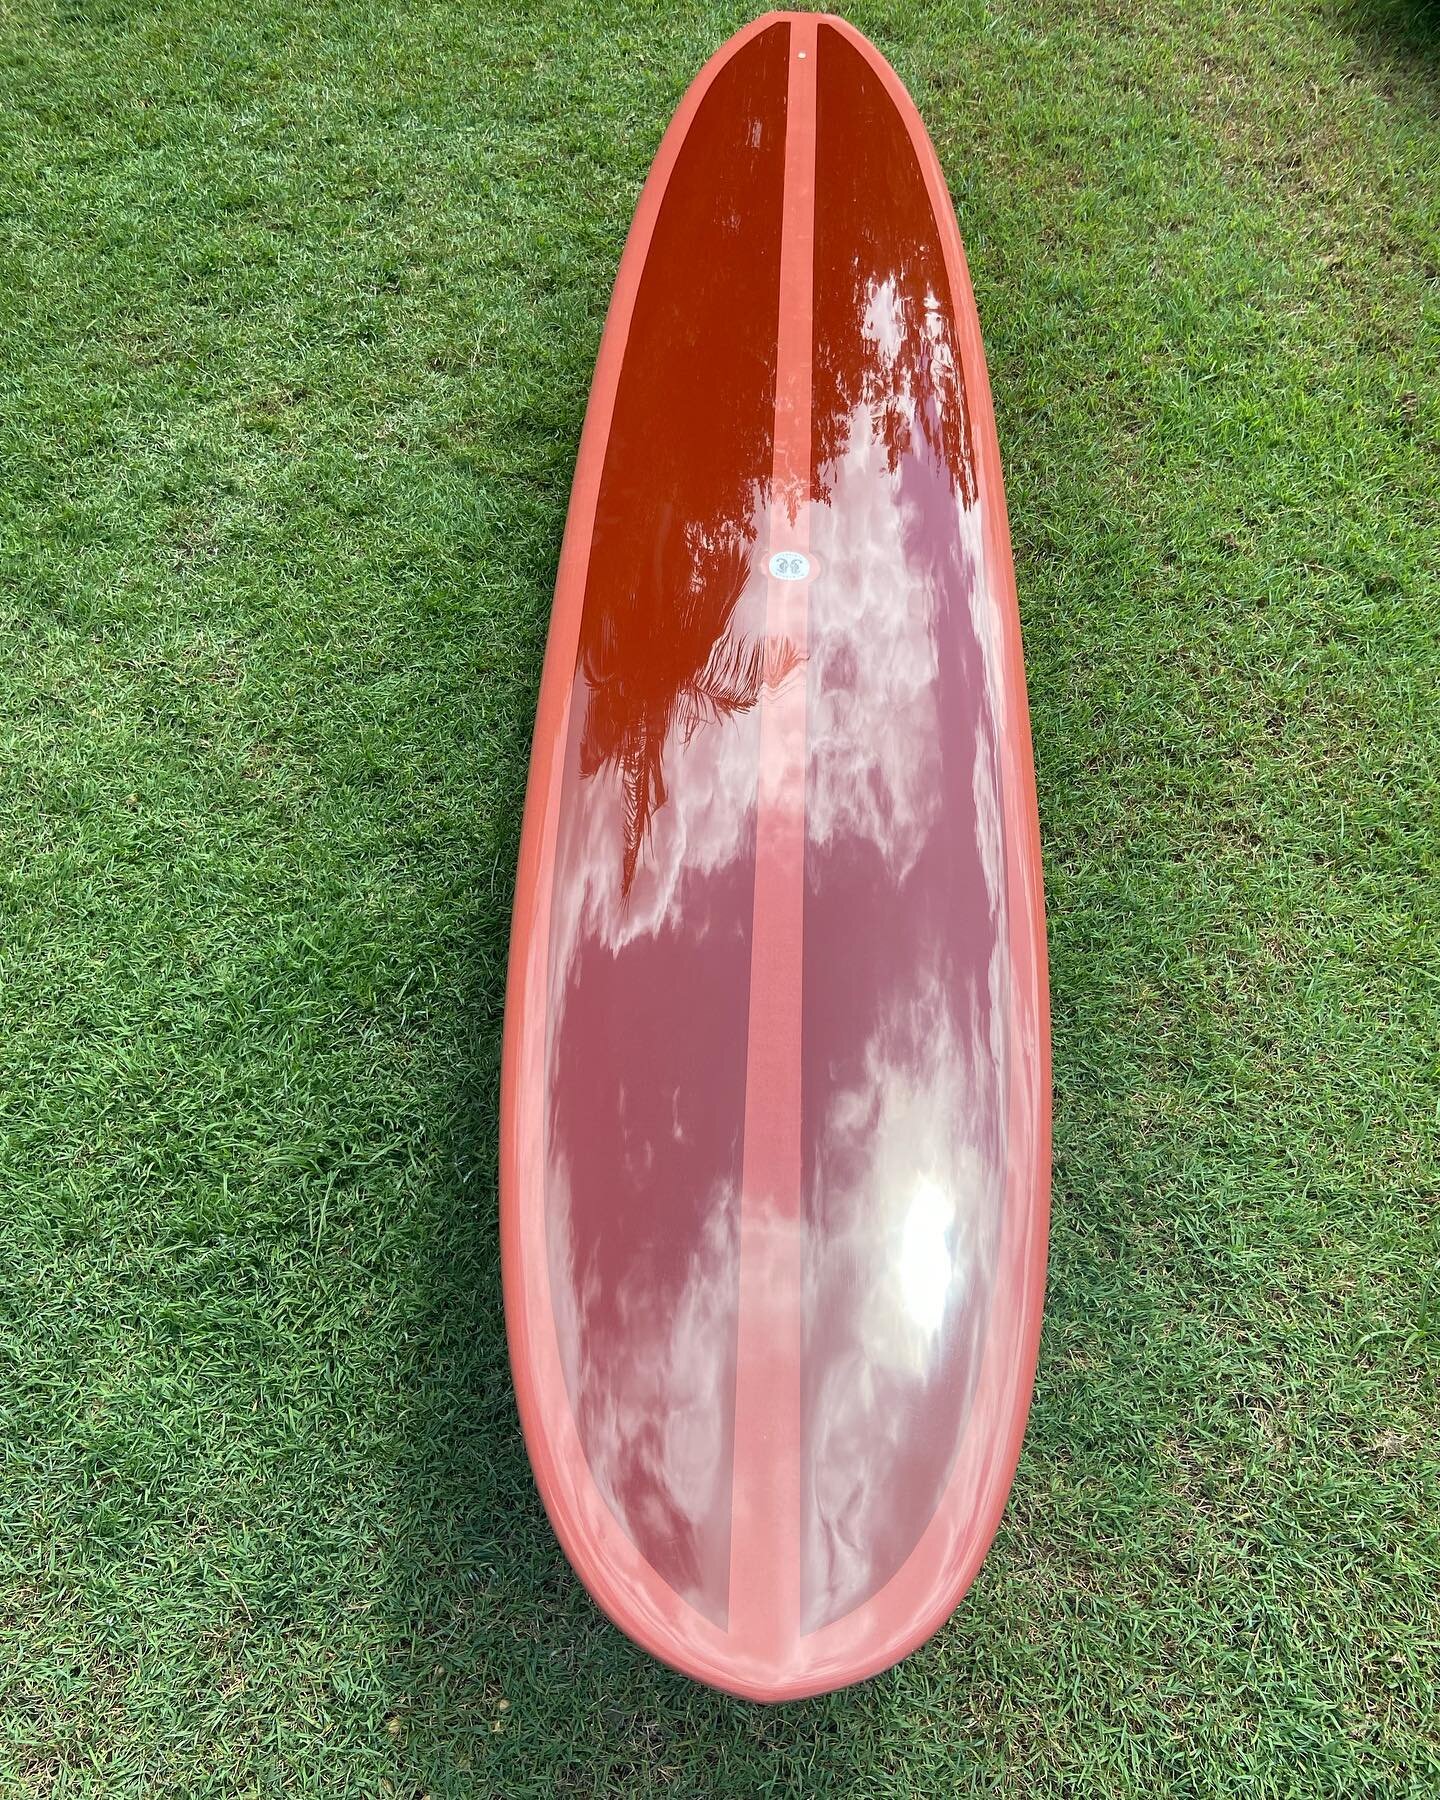 9&rsquo;4&rdquo; &bull;impala&bull; heading to @sunburntmess.surf in Bondi beach, this model features a semi &ldquo;pig&rdquo; outline, balanced rocker, medium nose concave splitting a rolled vee bottom, refined 50/50 rails glassed with opaque brick 